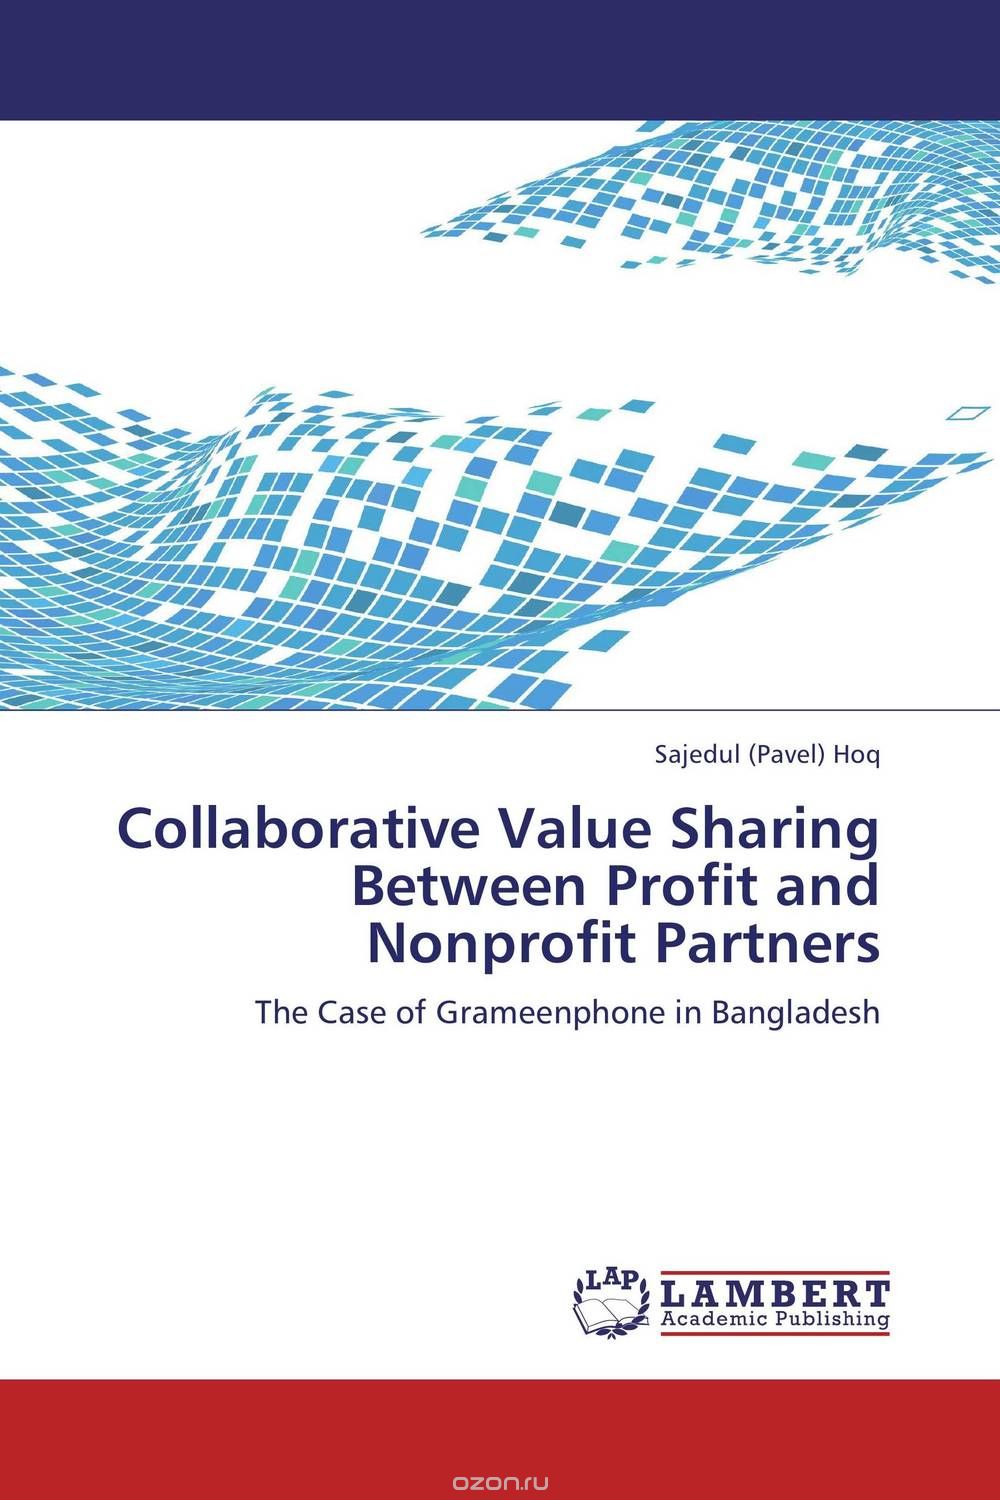 Collaborative Value Sharing Between Profit and Nonprofit Partners